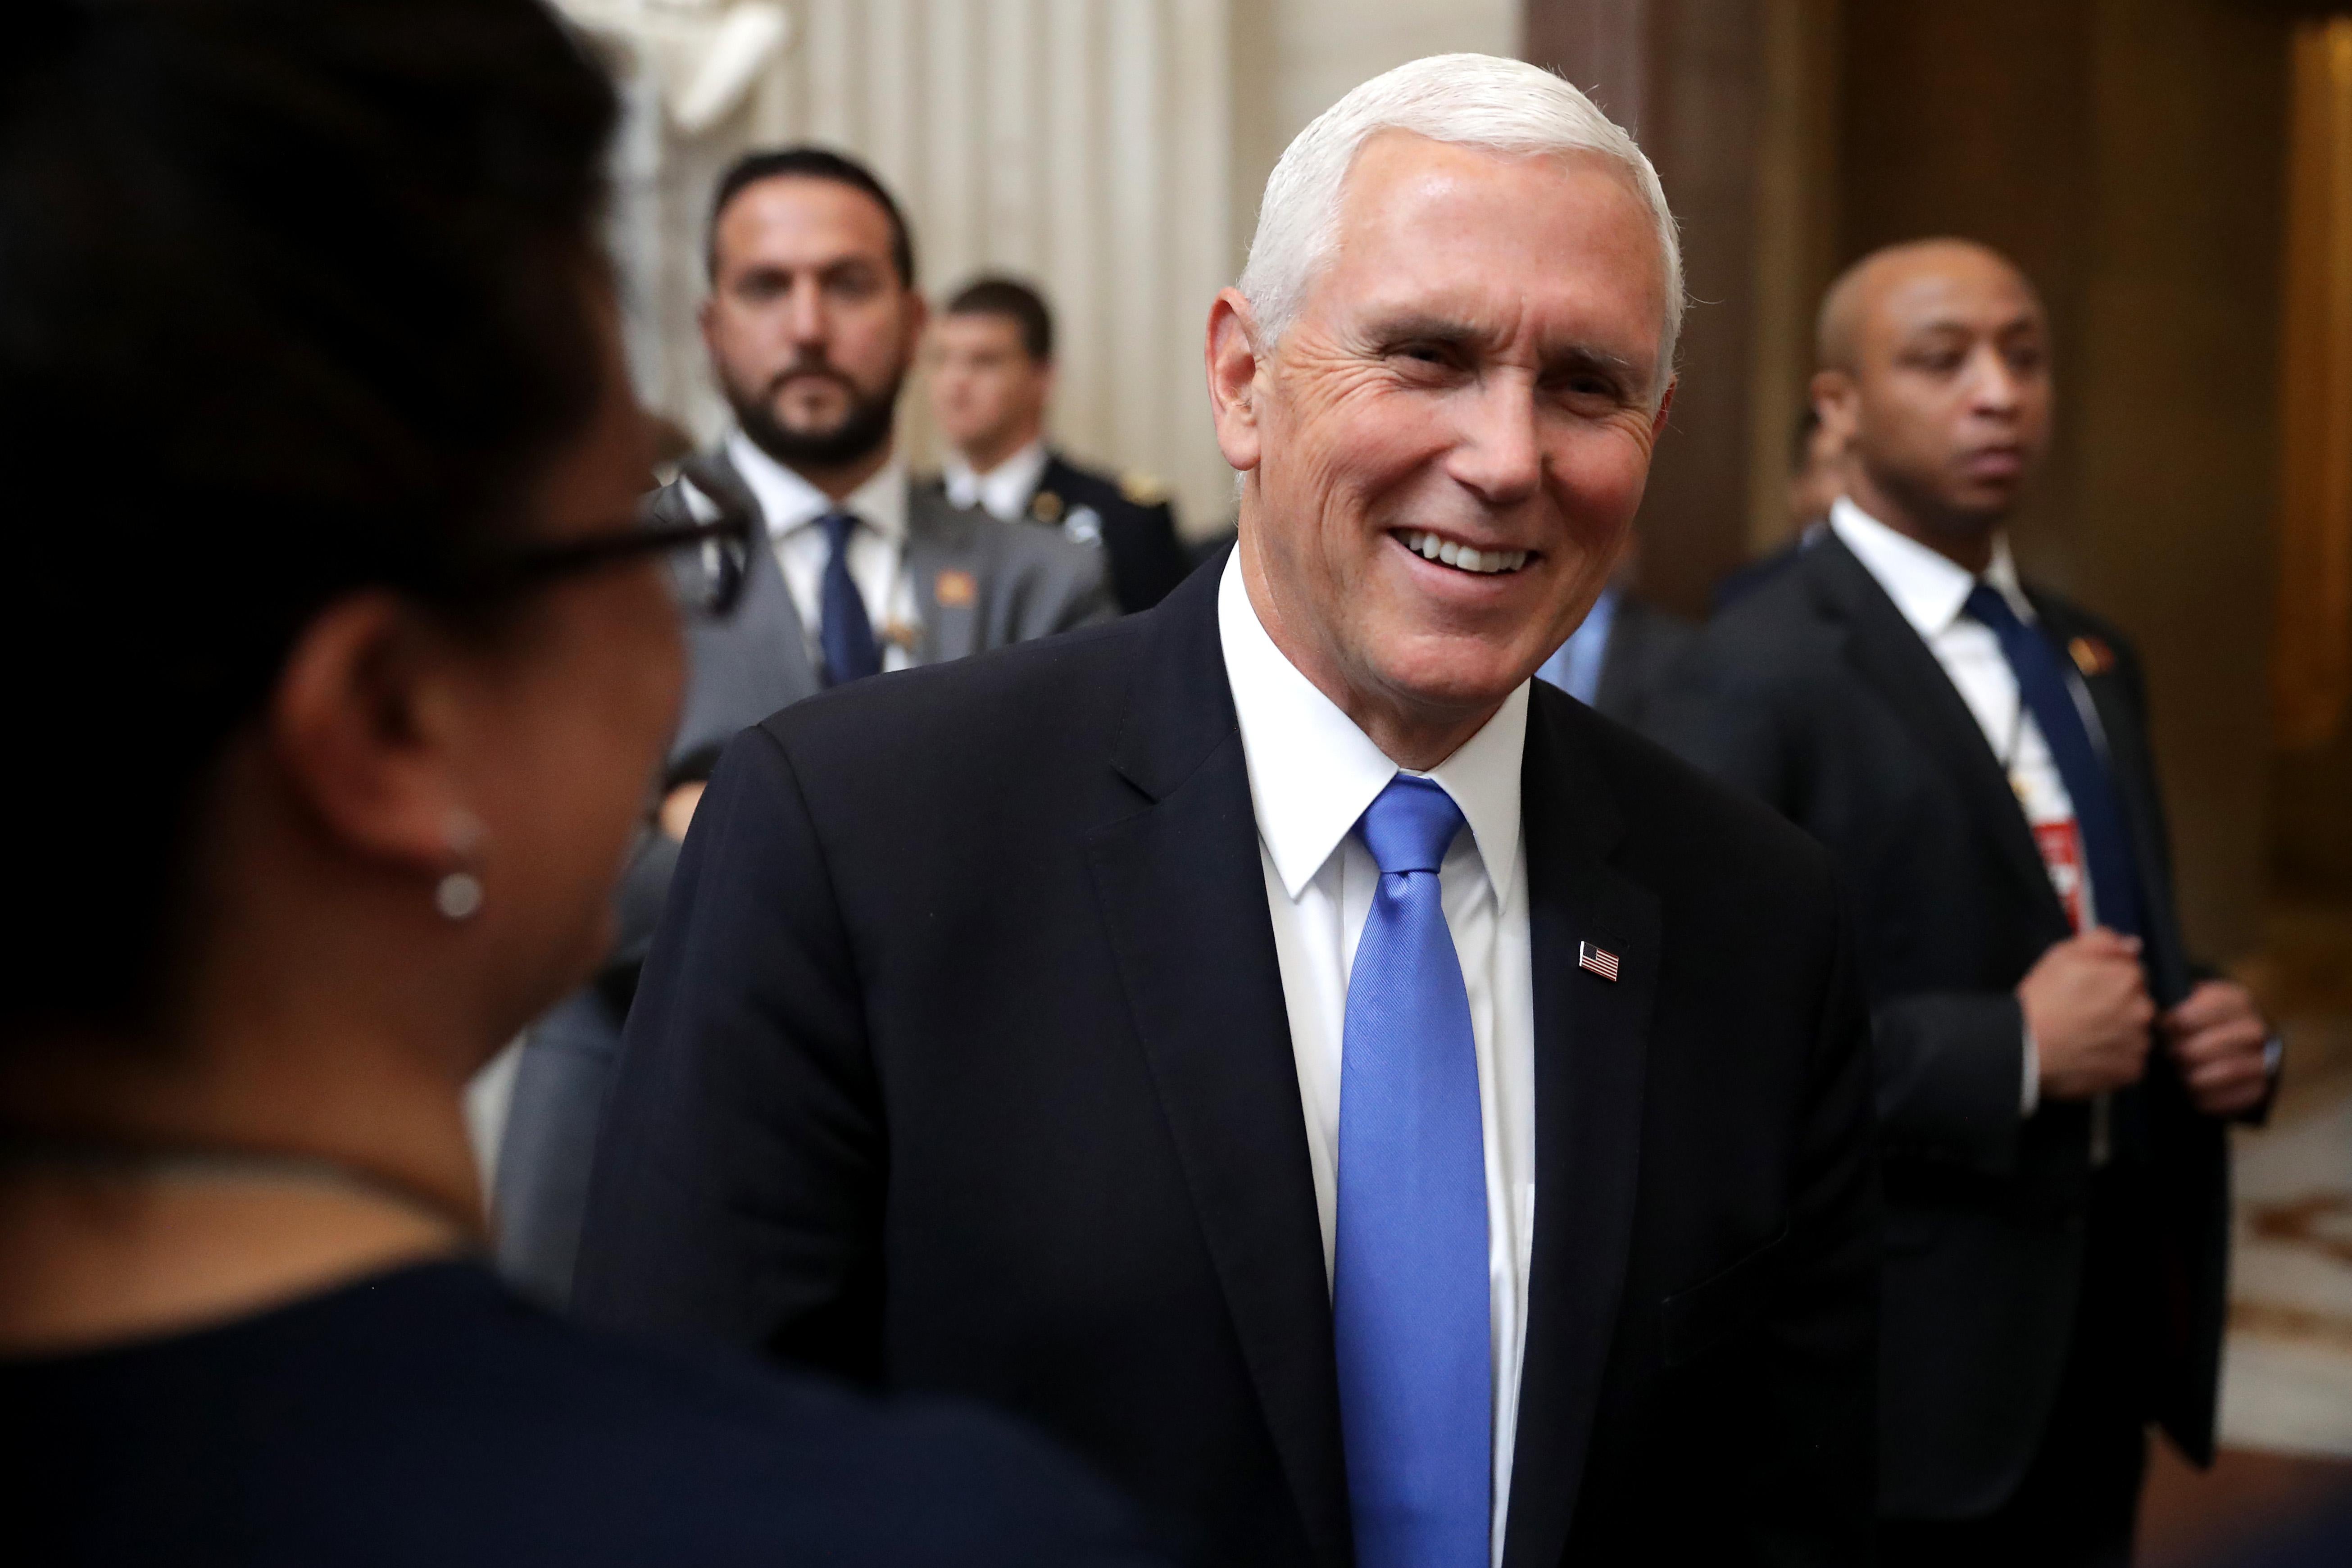 Vice President Mike Pence stops to greet and talk with tourists in the U.S. Capitol Rotunda May 14, 2019 in Washington, D.C.